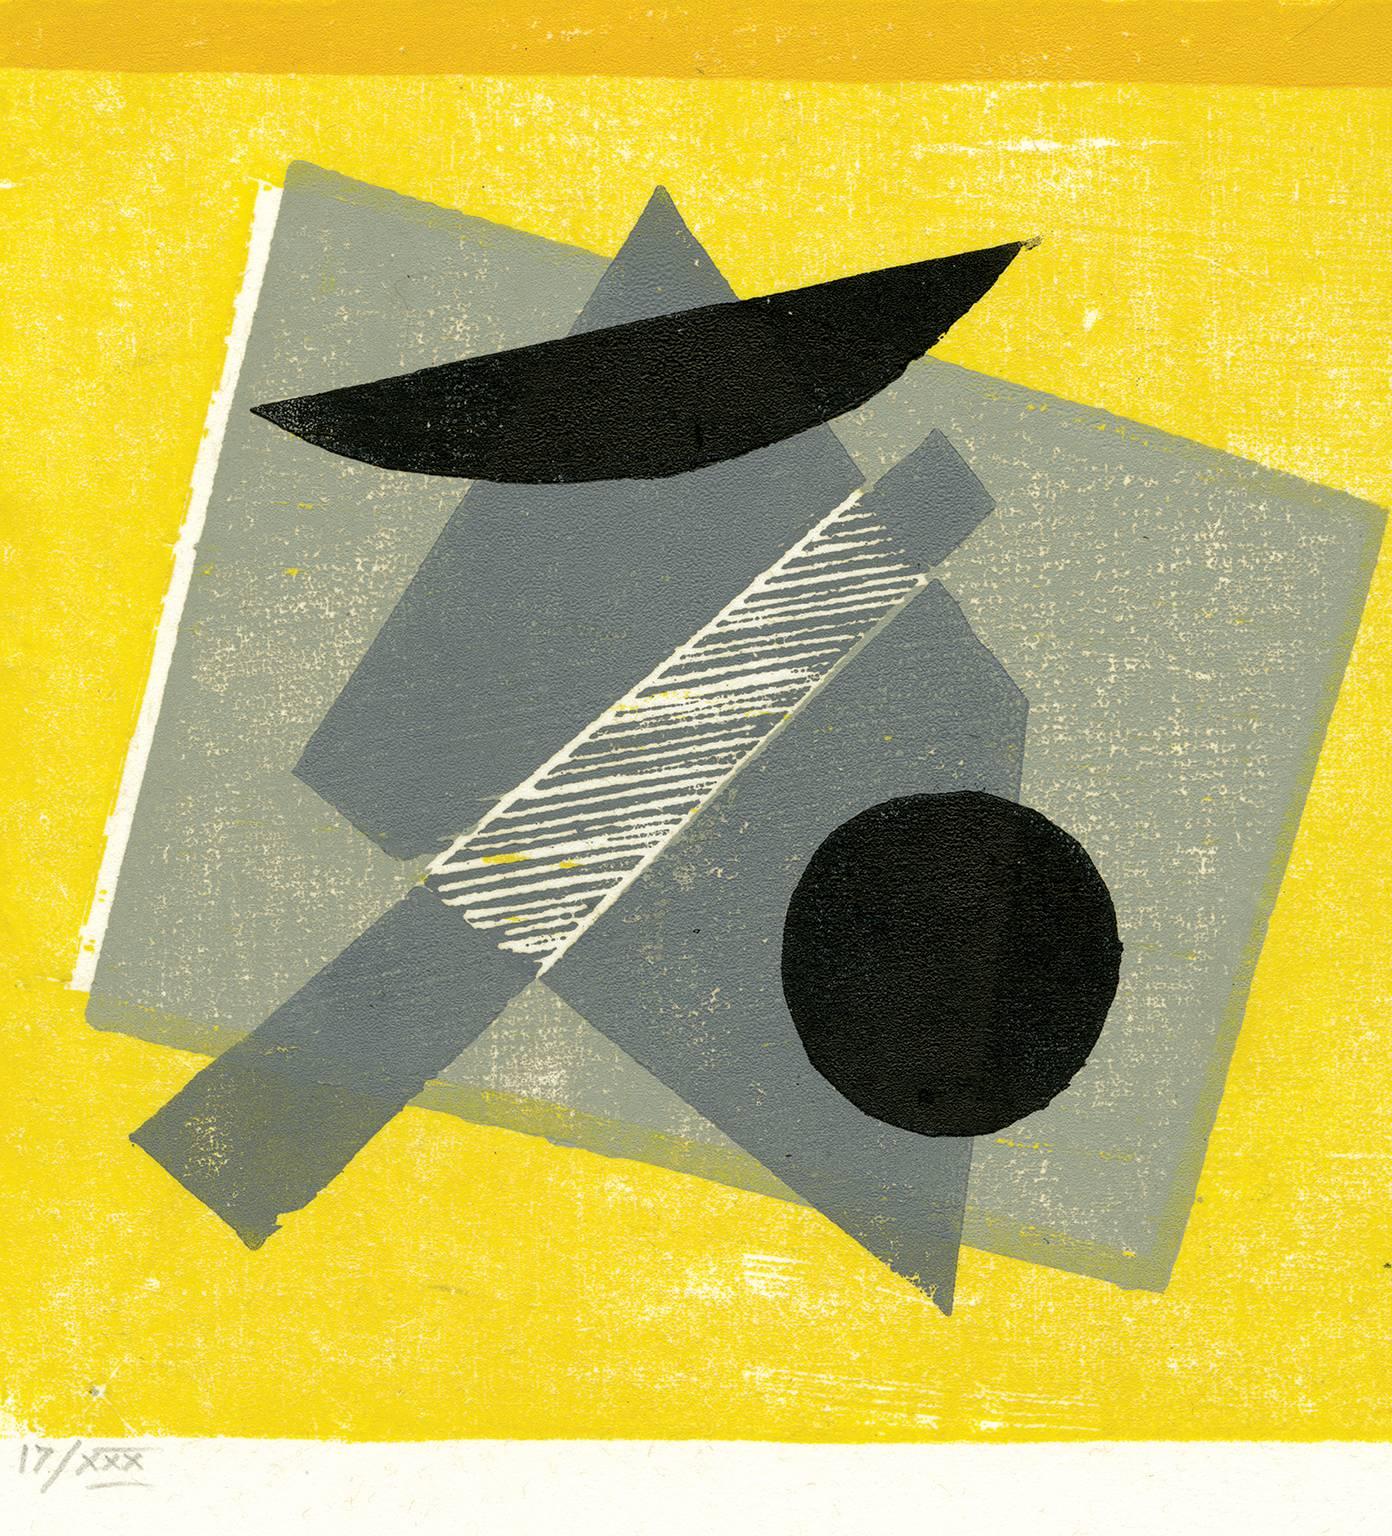 Twin Formation in Gray - Bauhaus Print by Werner Drewes